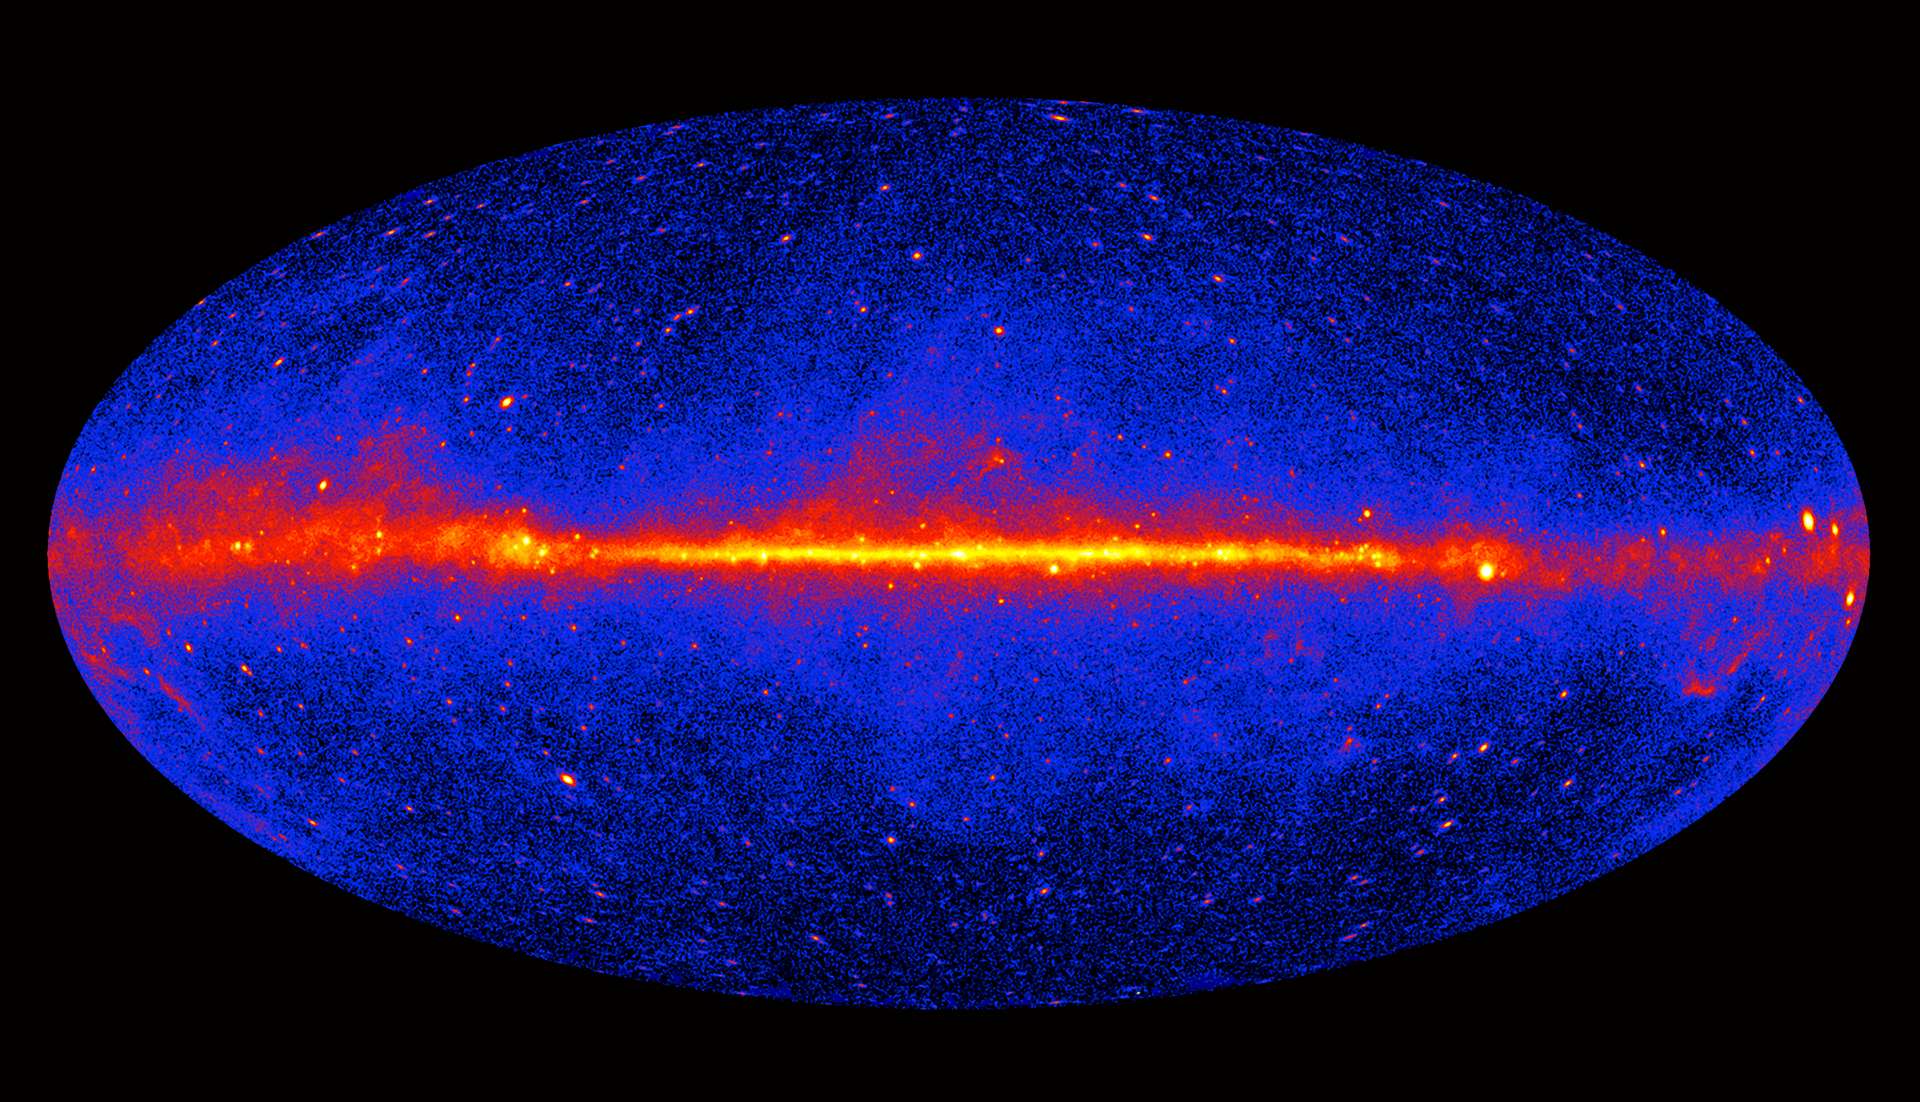 What does the Milky Way look like when viewed in gravitational waves?